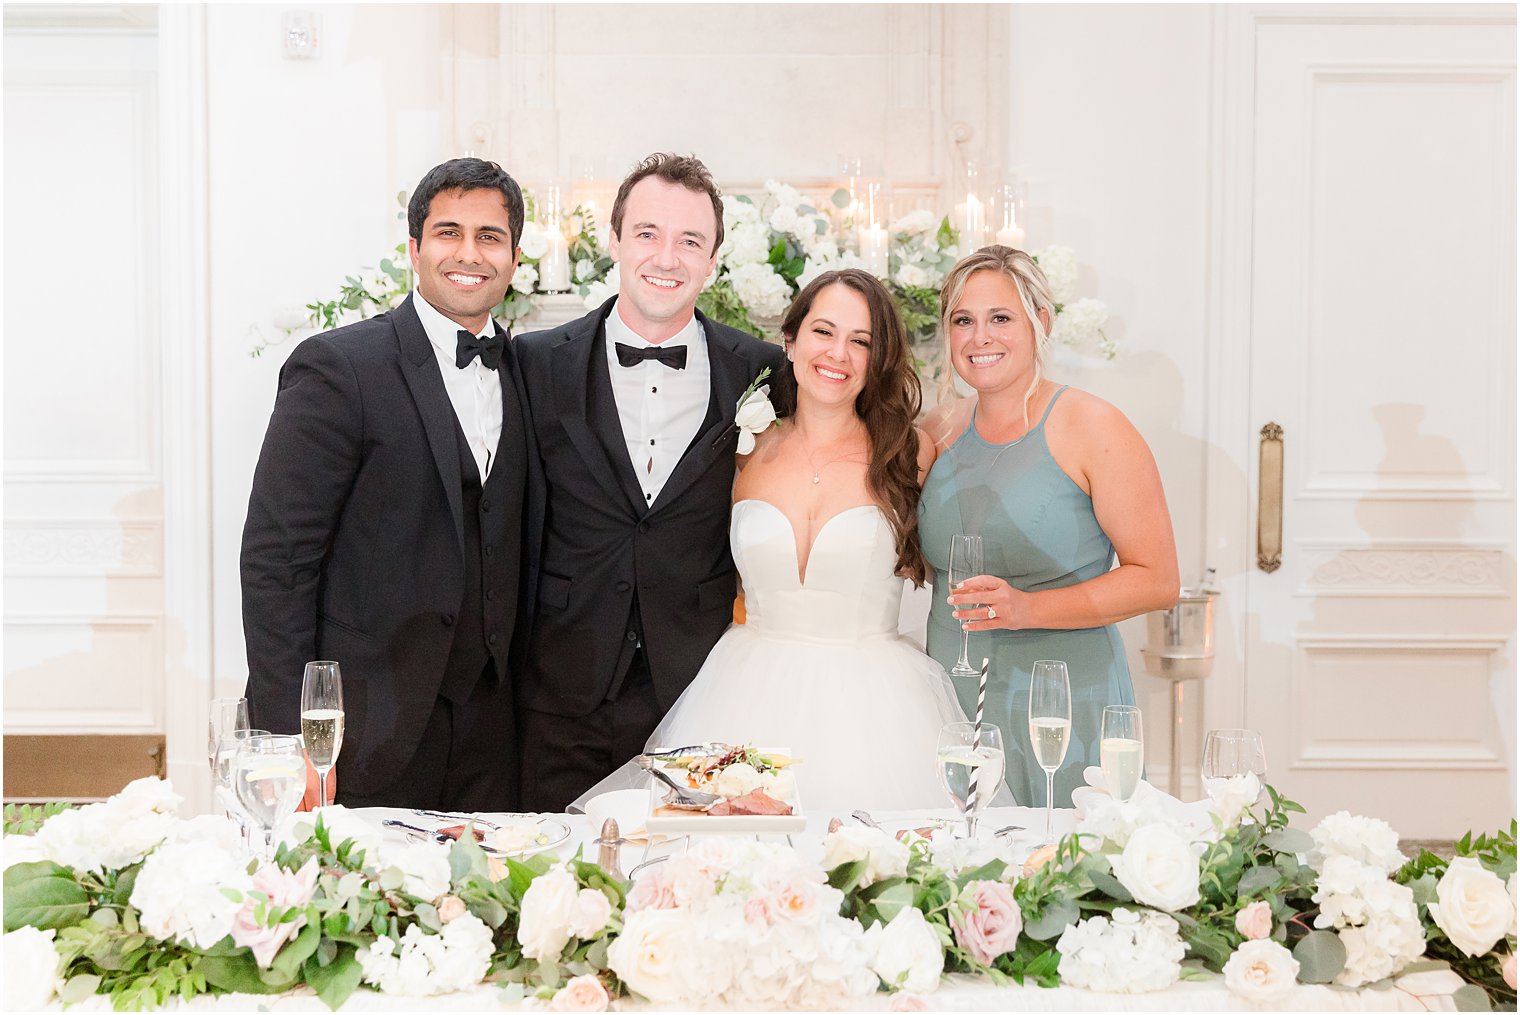  newlyweds pose with maid of honor and best man at sweetheart table 